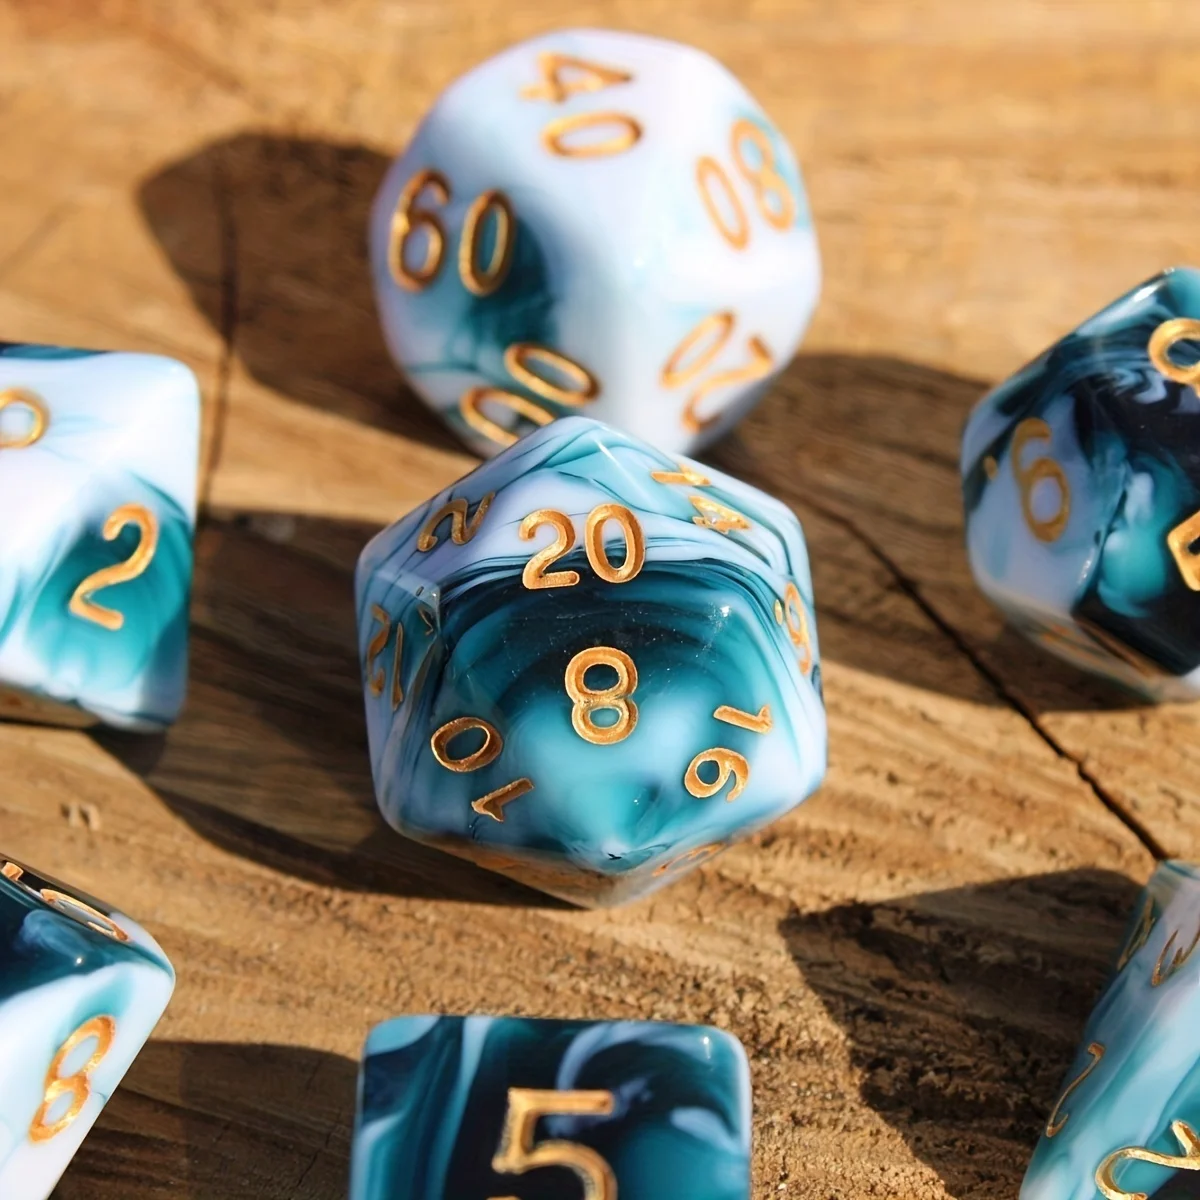 7Pcs/Set Blueberry Marble Dice for DND Dungeons and Dragons Table Games D&D RPG Tabletop Roleplaying dungeons 3 dlc 02 evil of the caribbean pc